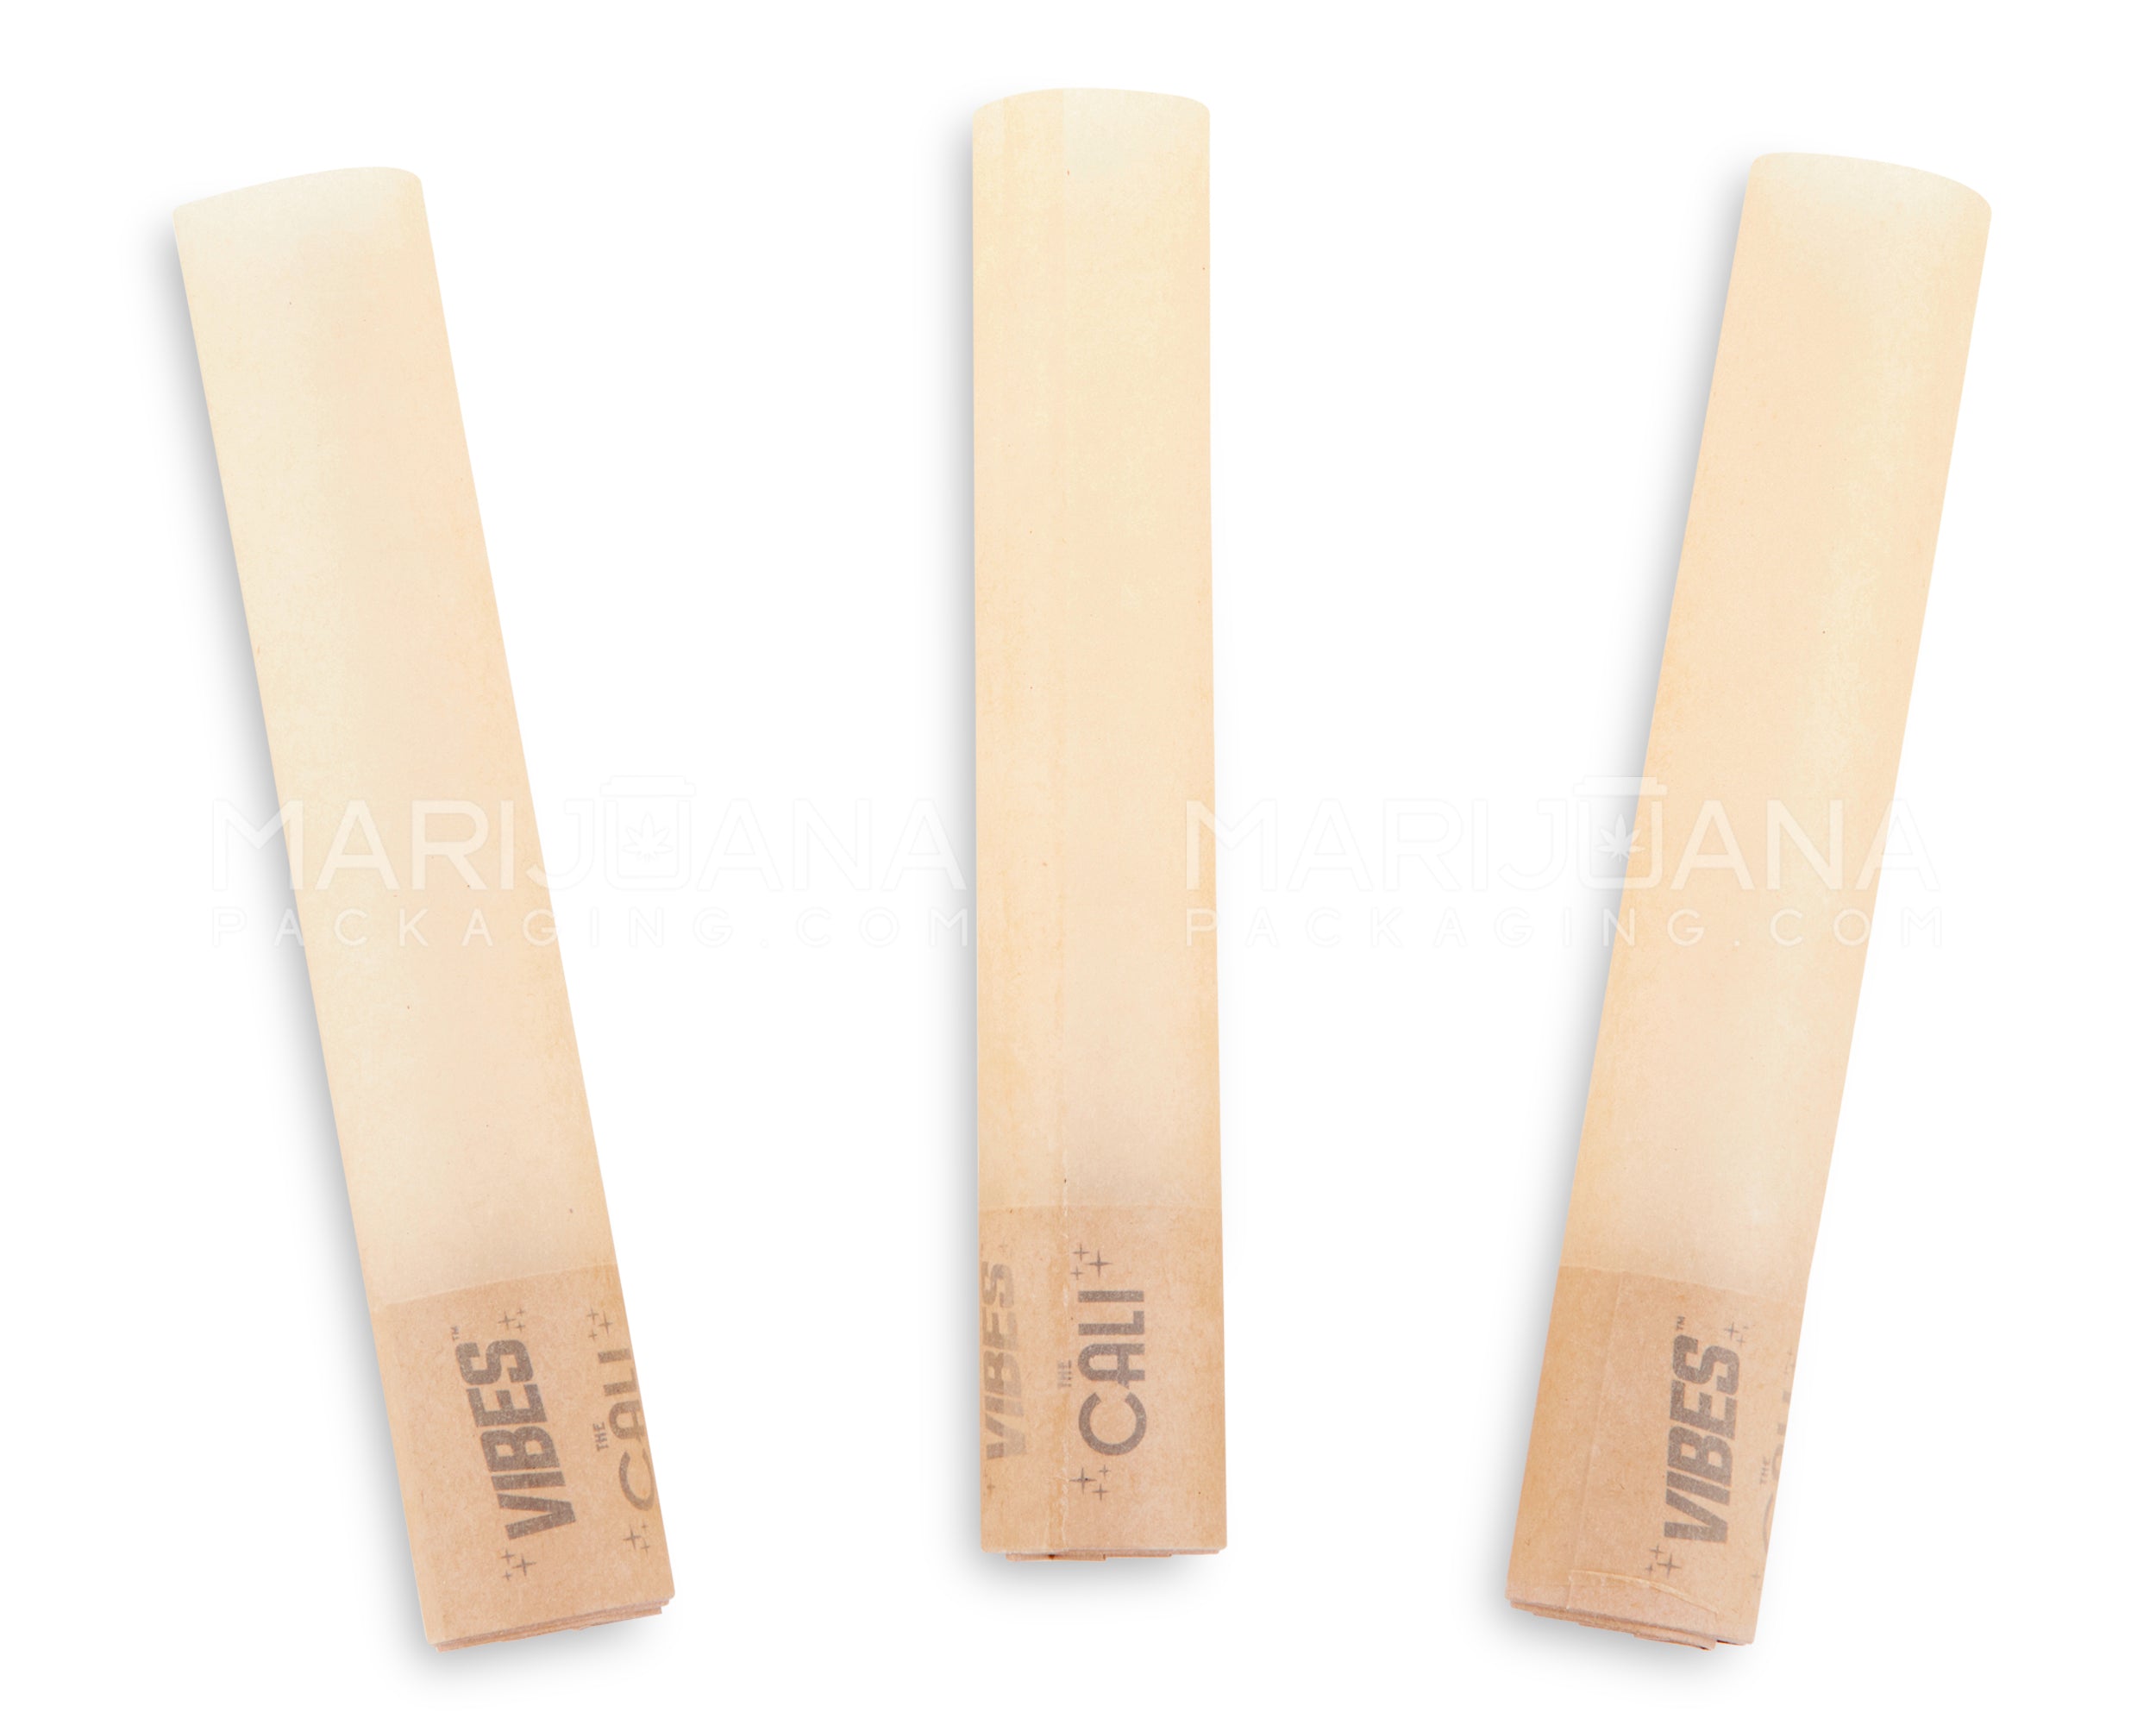 VIBES | 'Retail Display' The Cali 3 Gram Organic Pre-Rolled Cones | 110mm - Hemp Paper - 24 Count - 5